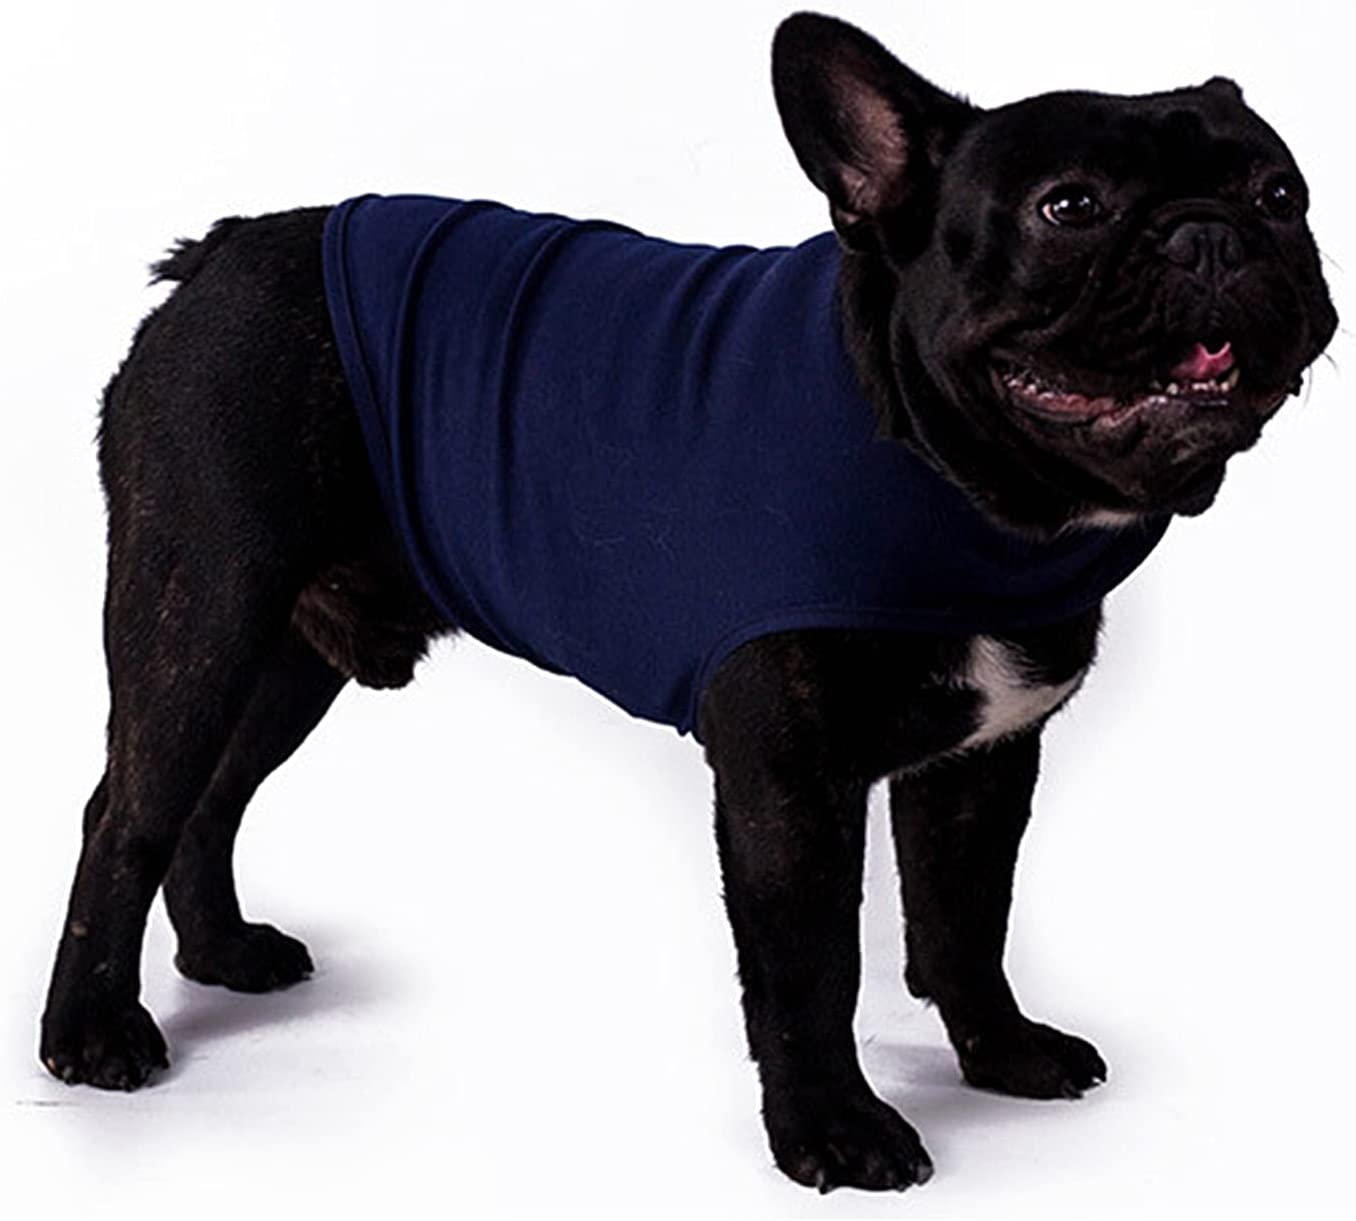 WUHNGD Comfort Dog Anxiety Relief Coat, Dog Anxiety Calming Vest Wrap,Dog Shirt for Thunder, Dog Anxiety Vest Jacket Warp,Puppy Calming Coat Anxiety Relief(XS)